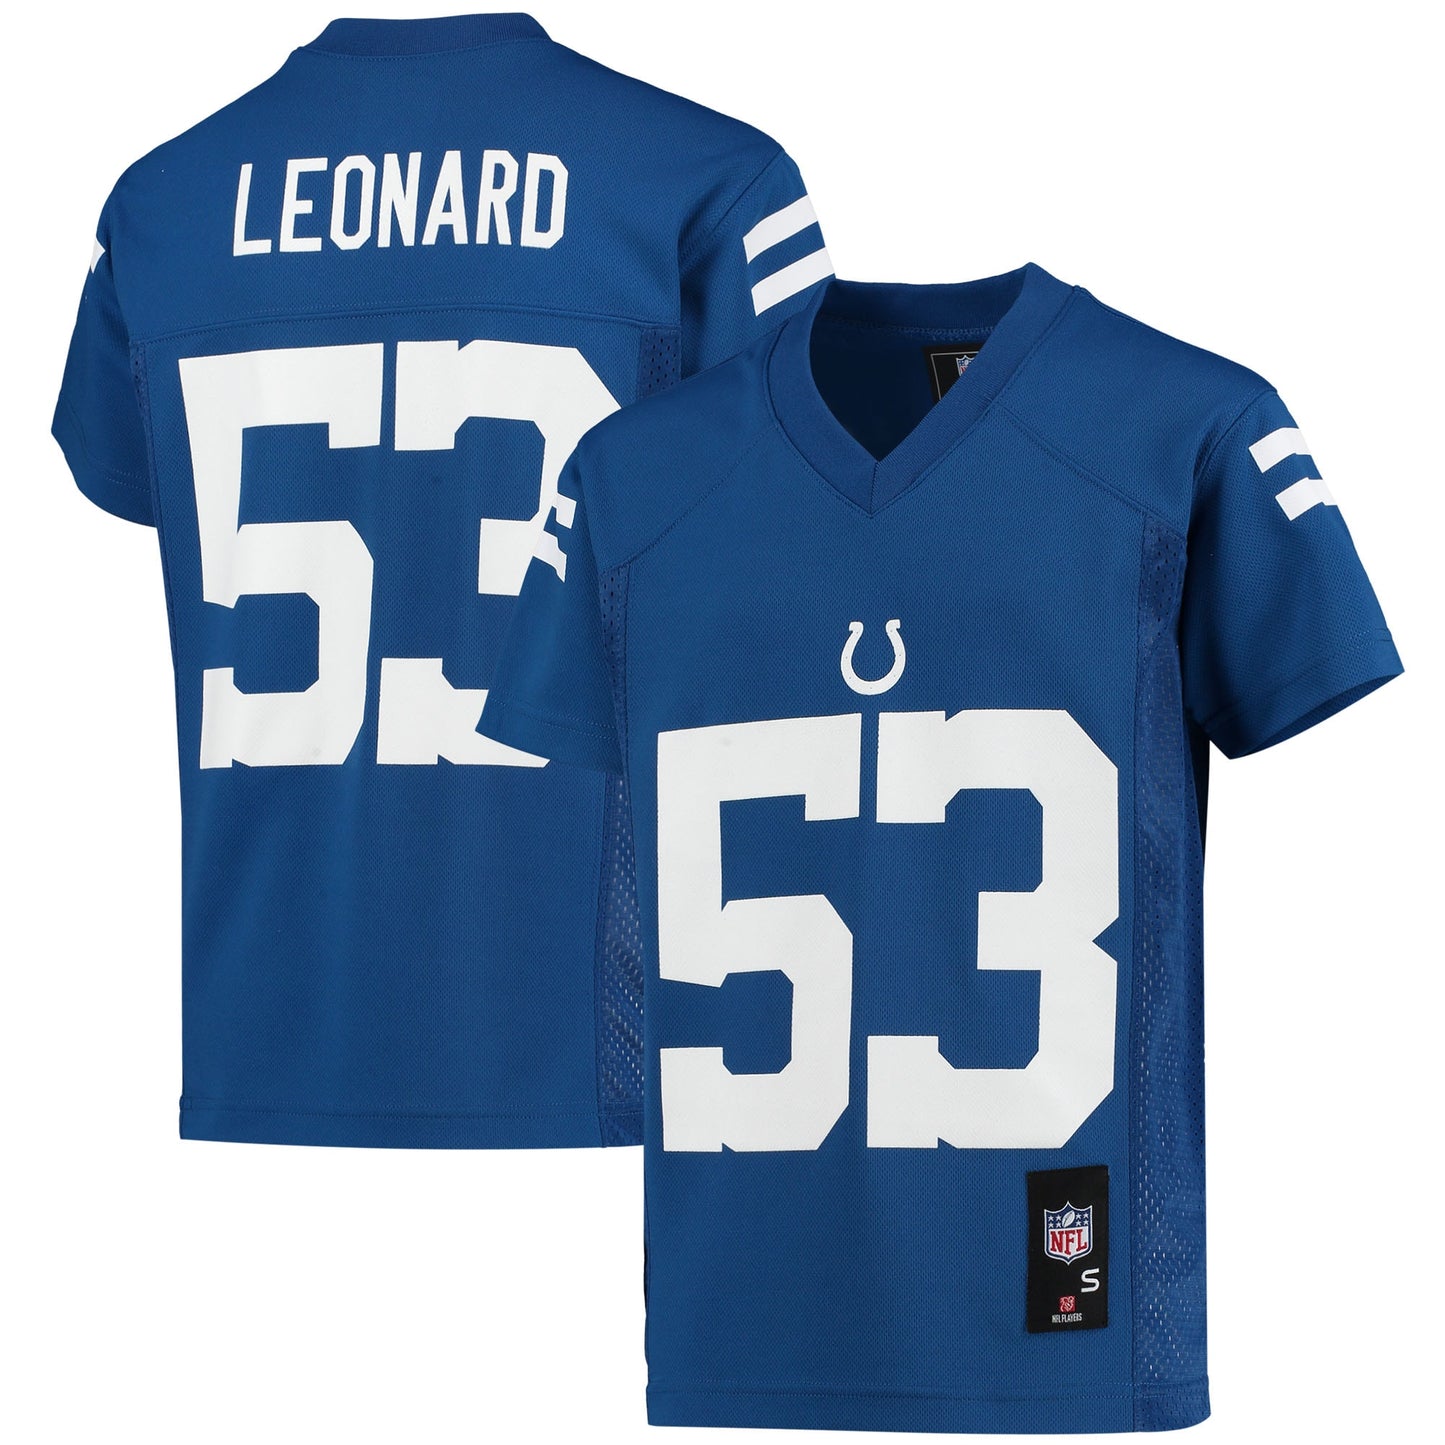 Shaquille Leonard Indianapolis Colts Youth Replica Player Jersey - Royal